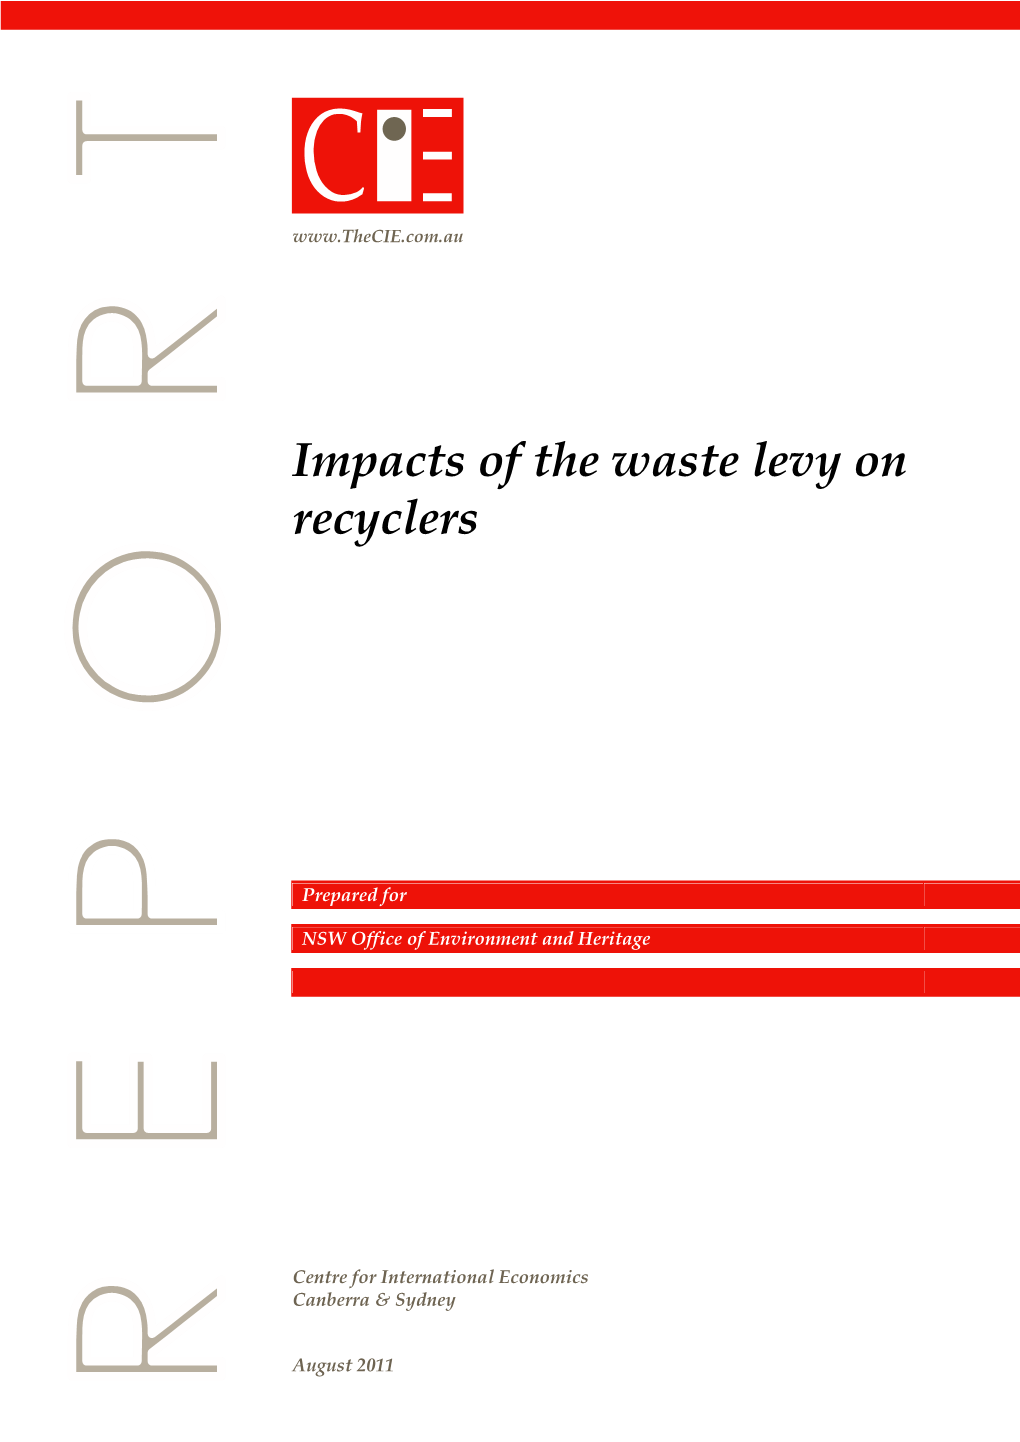 Impacts of the Waste Levy on Recyclers 2011